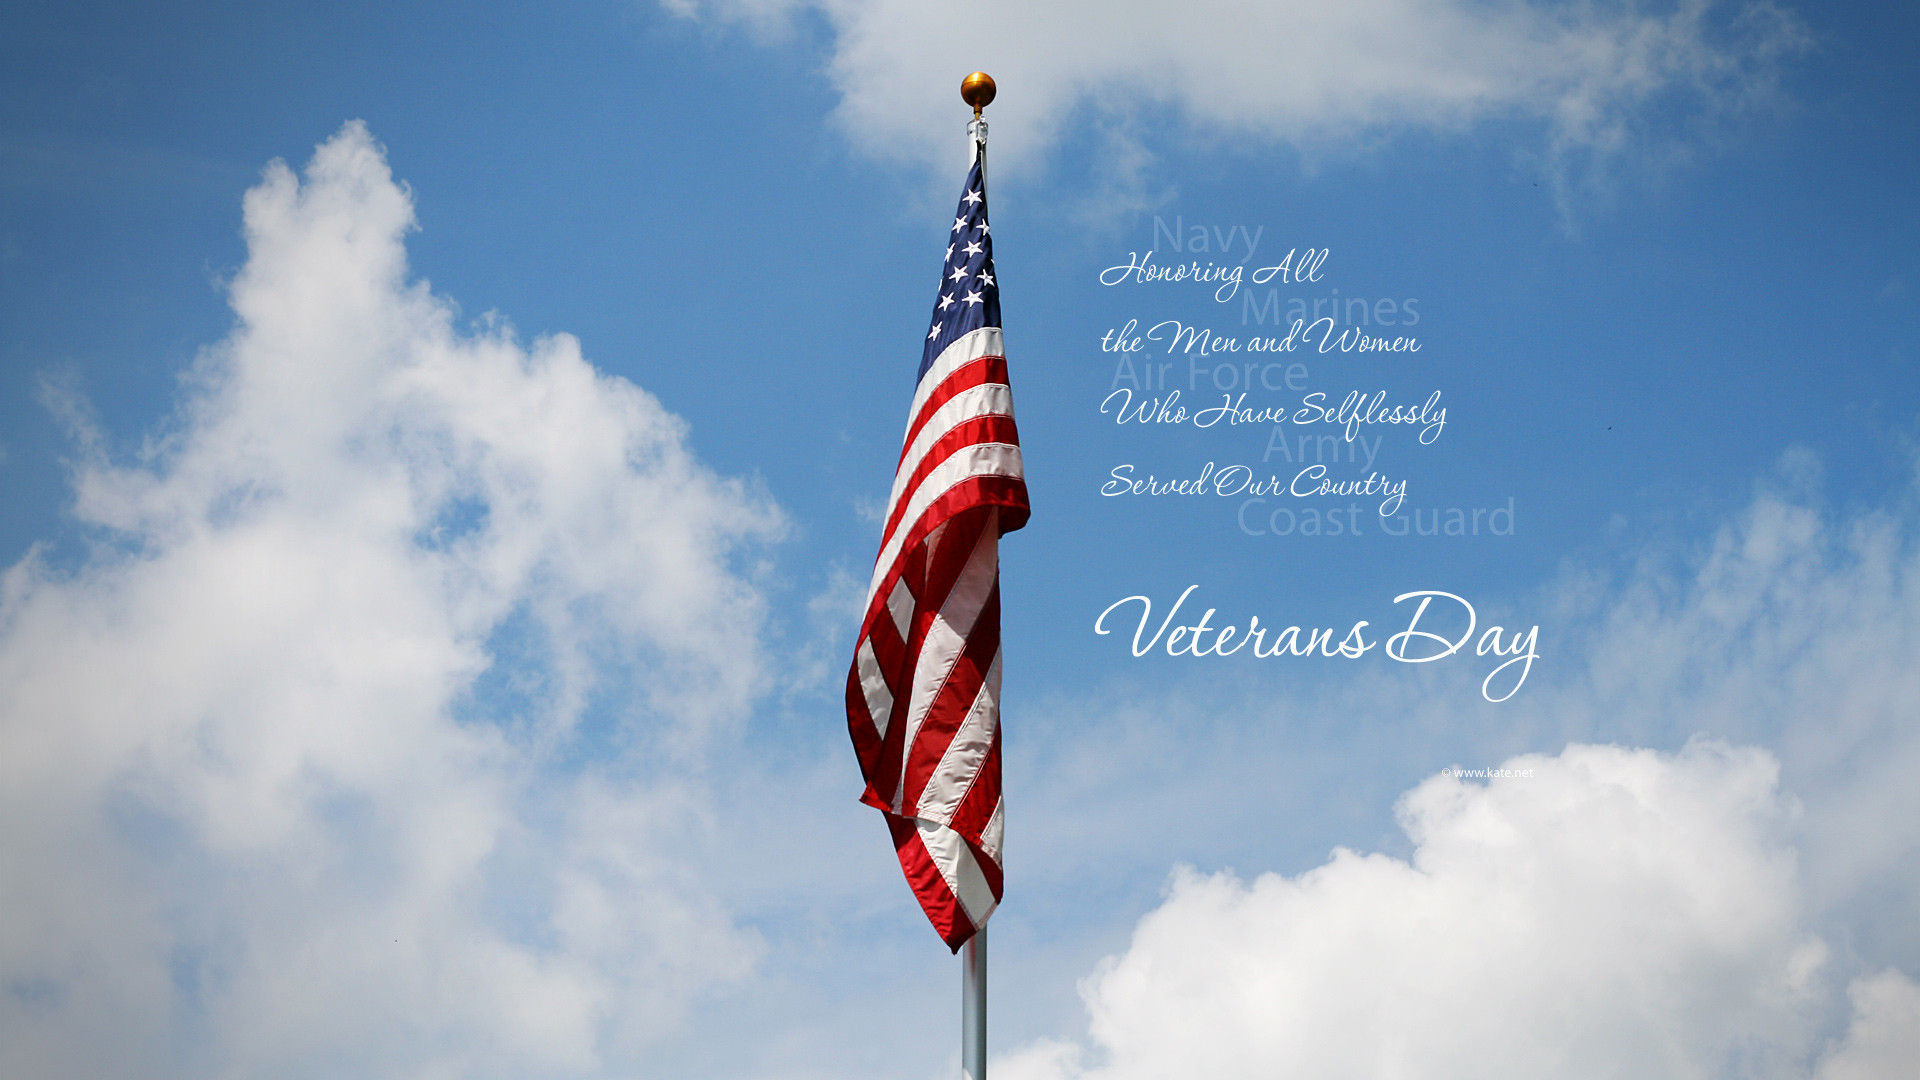 1920x1080 Veterans Day Wallpapers and Facebook Covers, Veterans Day History on .